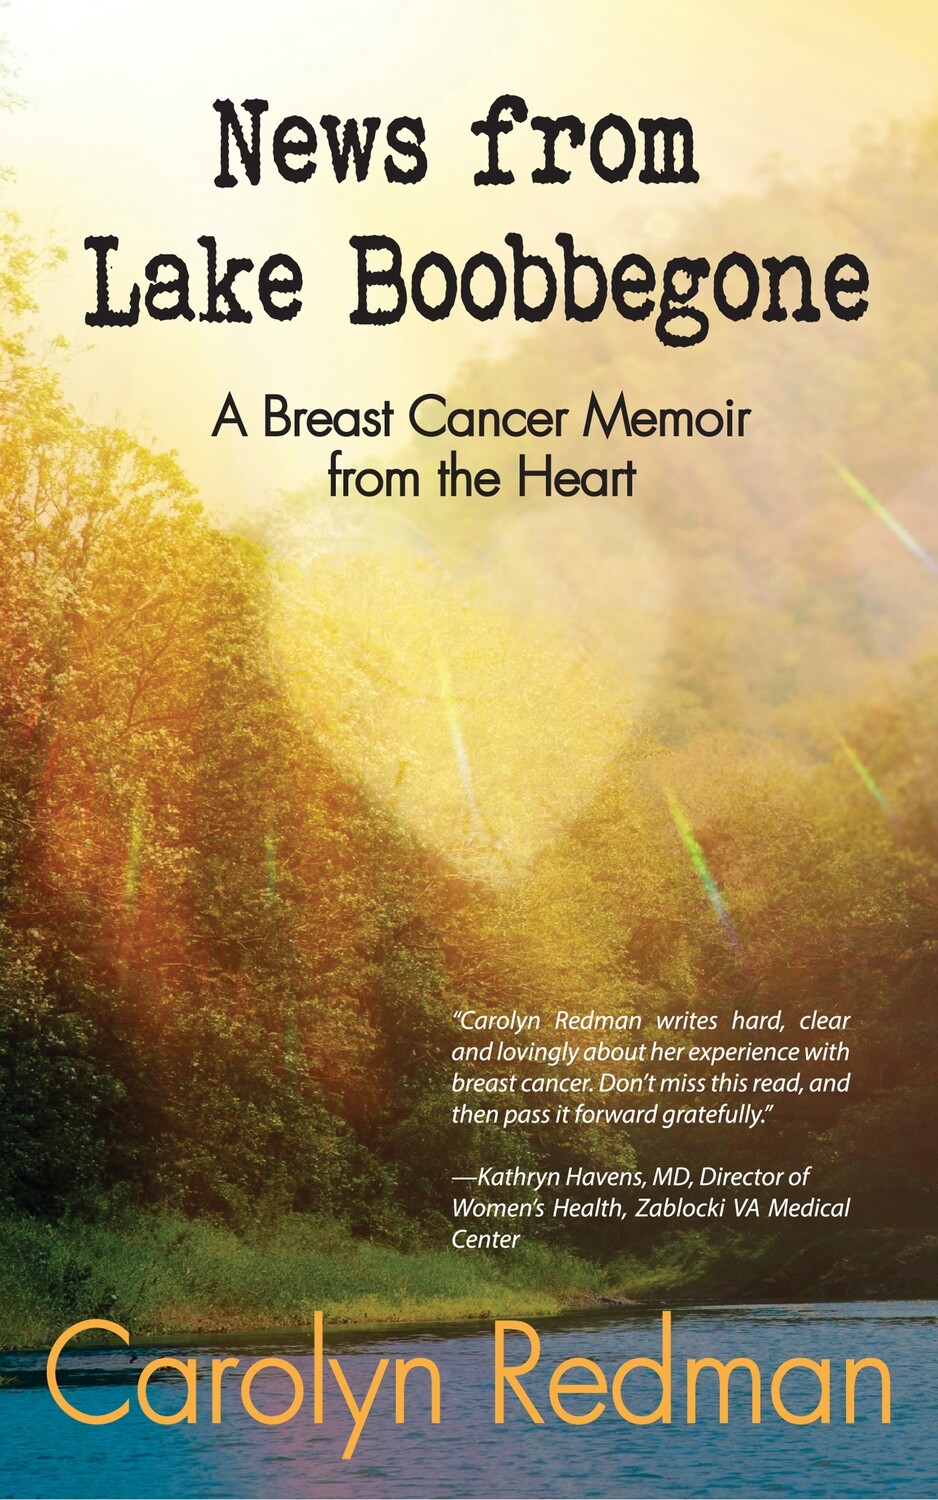 News from Lake Boobbegone: A Breast Cancer Memoir from the Heart by Carolyn Redman